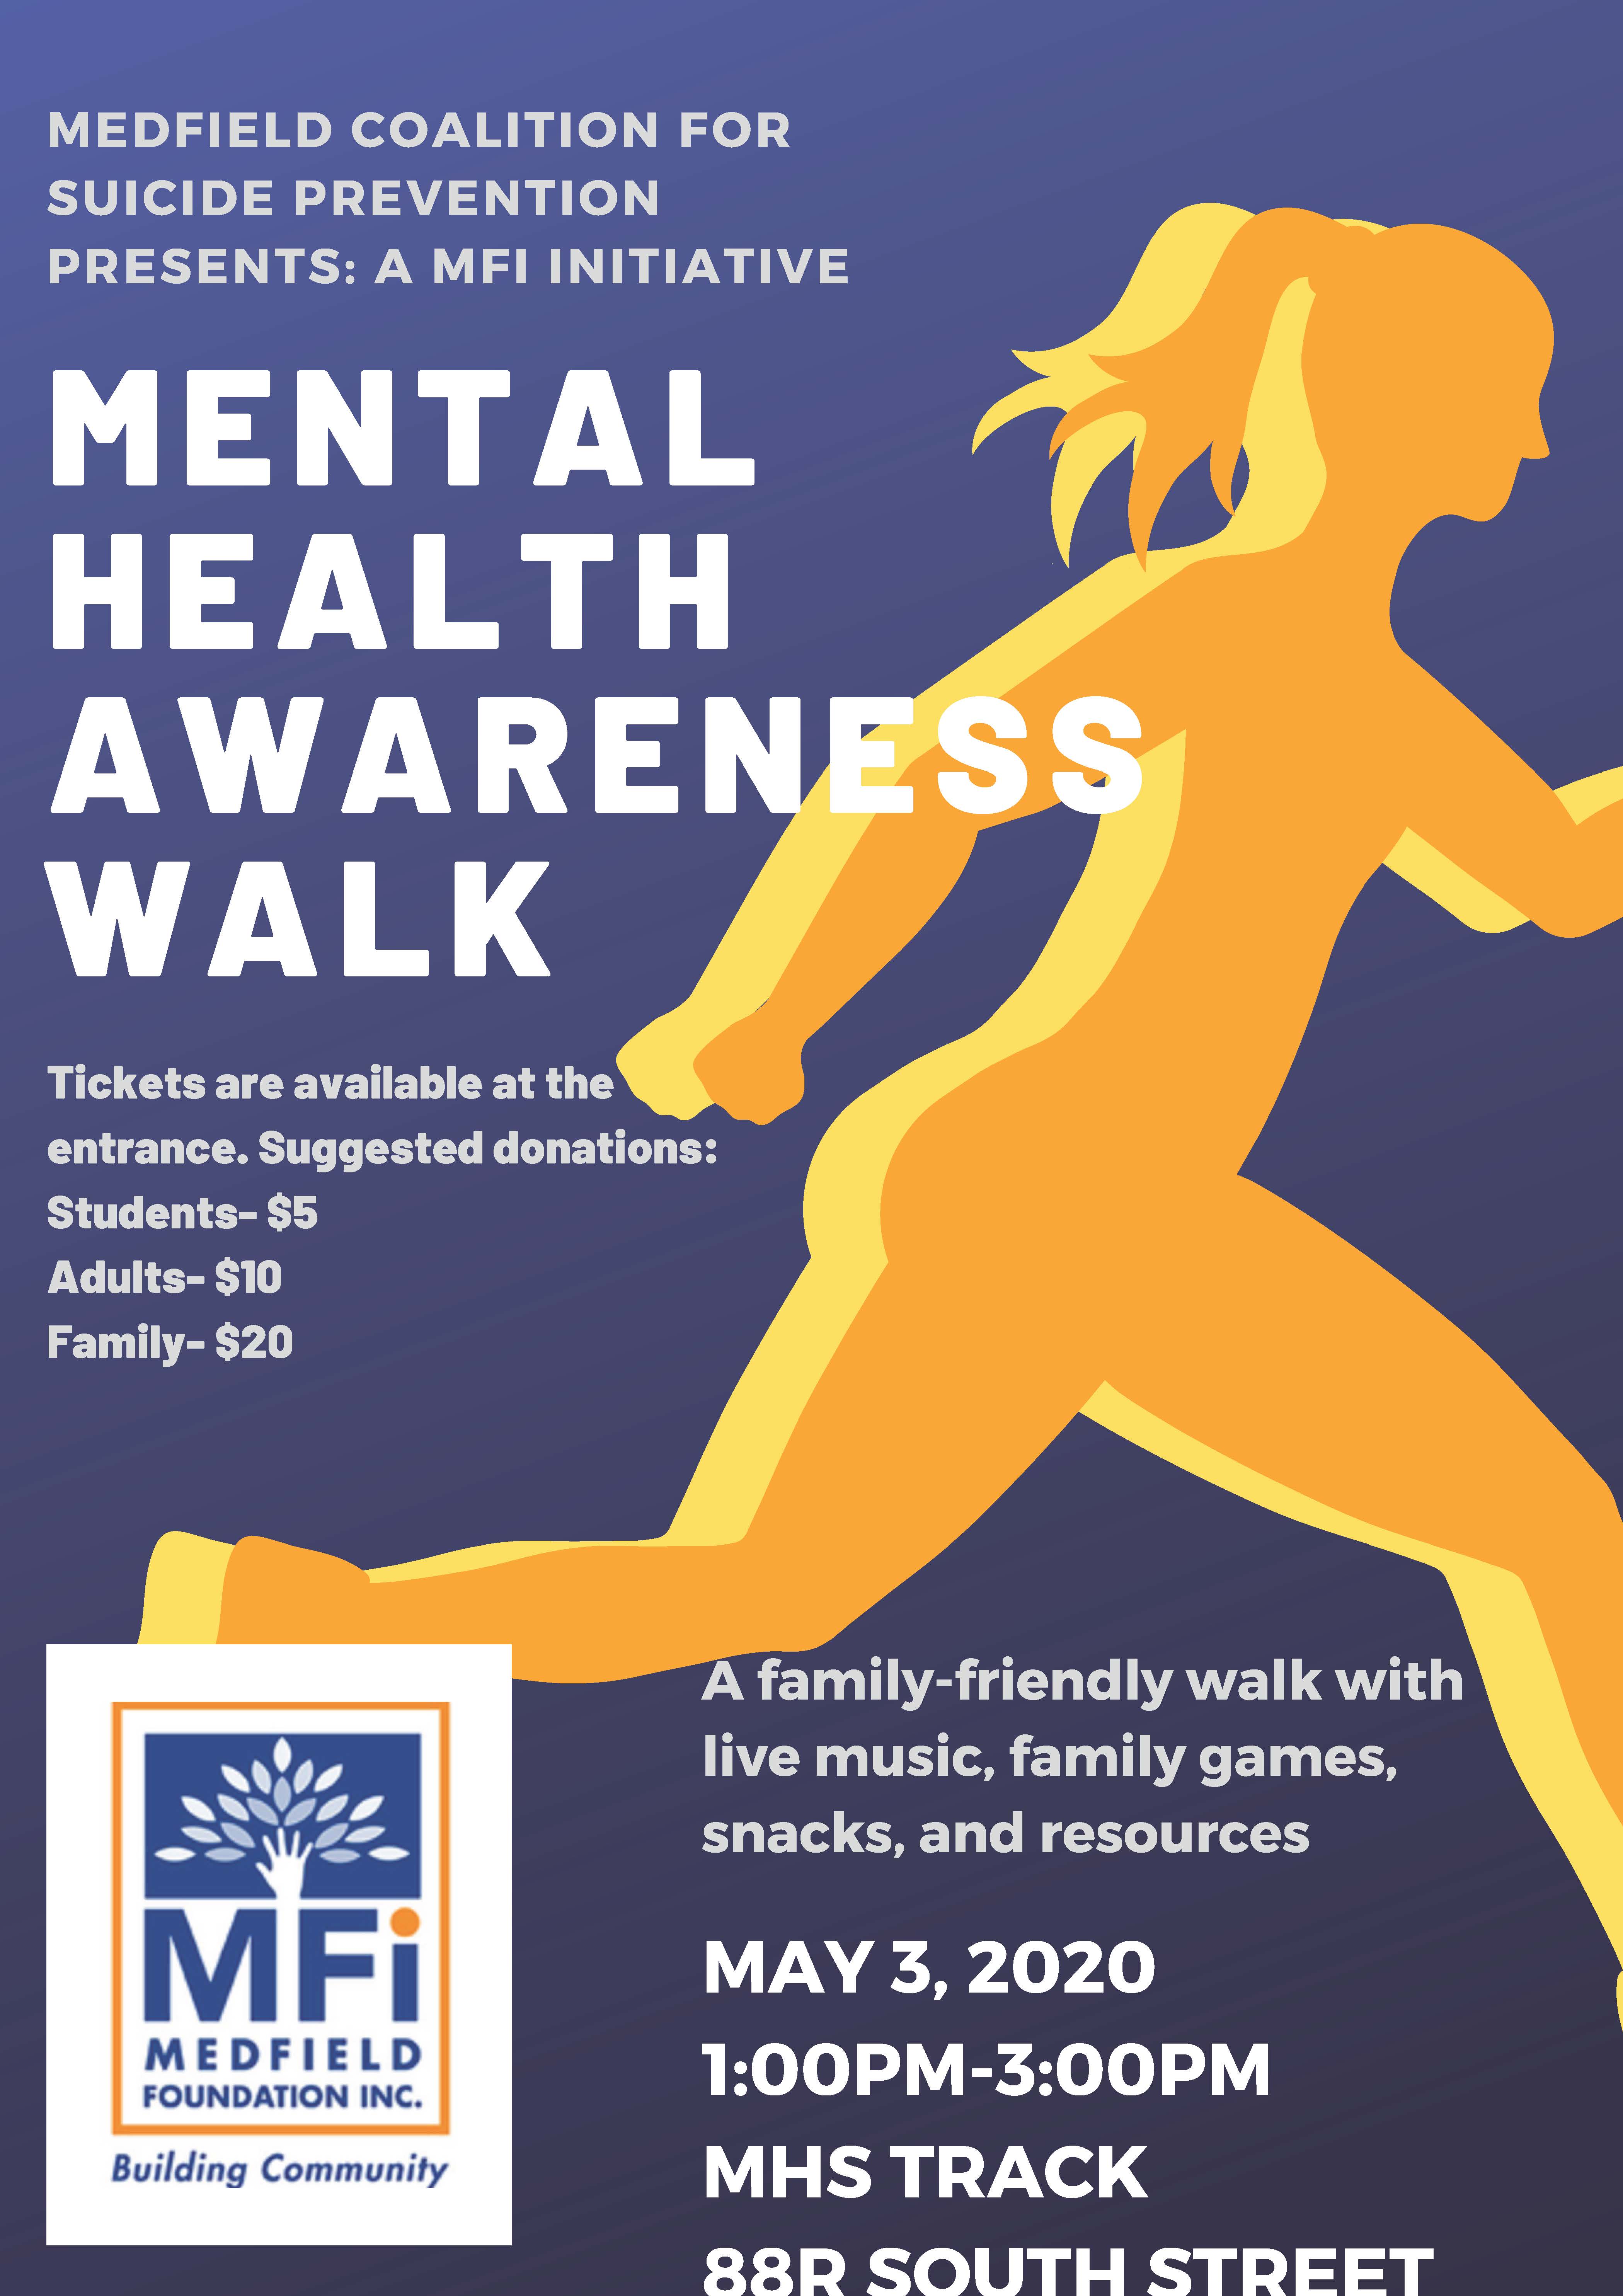 MEDFIELD COALITION FOR SUICIDE PREVENTION PRESENTS: A MFI INITIATIVE MENTAL HEALTH AWARENESS WALK A family-friendly walk with live music, family games, snacks, and resources MAY 3, 2020 1:00PM-3:00PM MHS TRACK 88R SOUTH STREET Tickets are available at the entrance. Suggested donations: Students- $5 Adults- $10 Family- $20